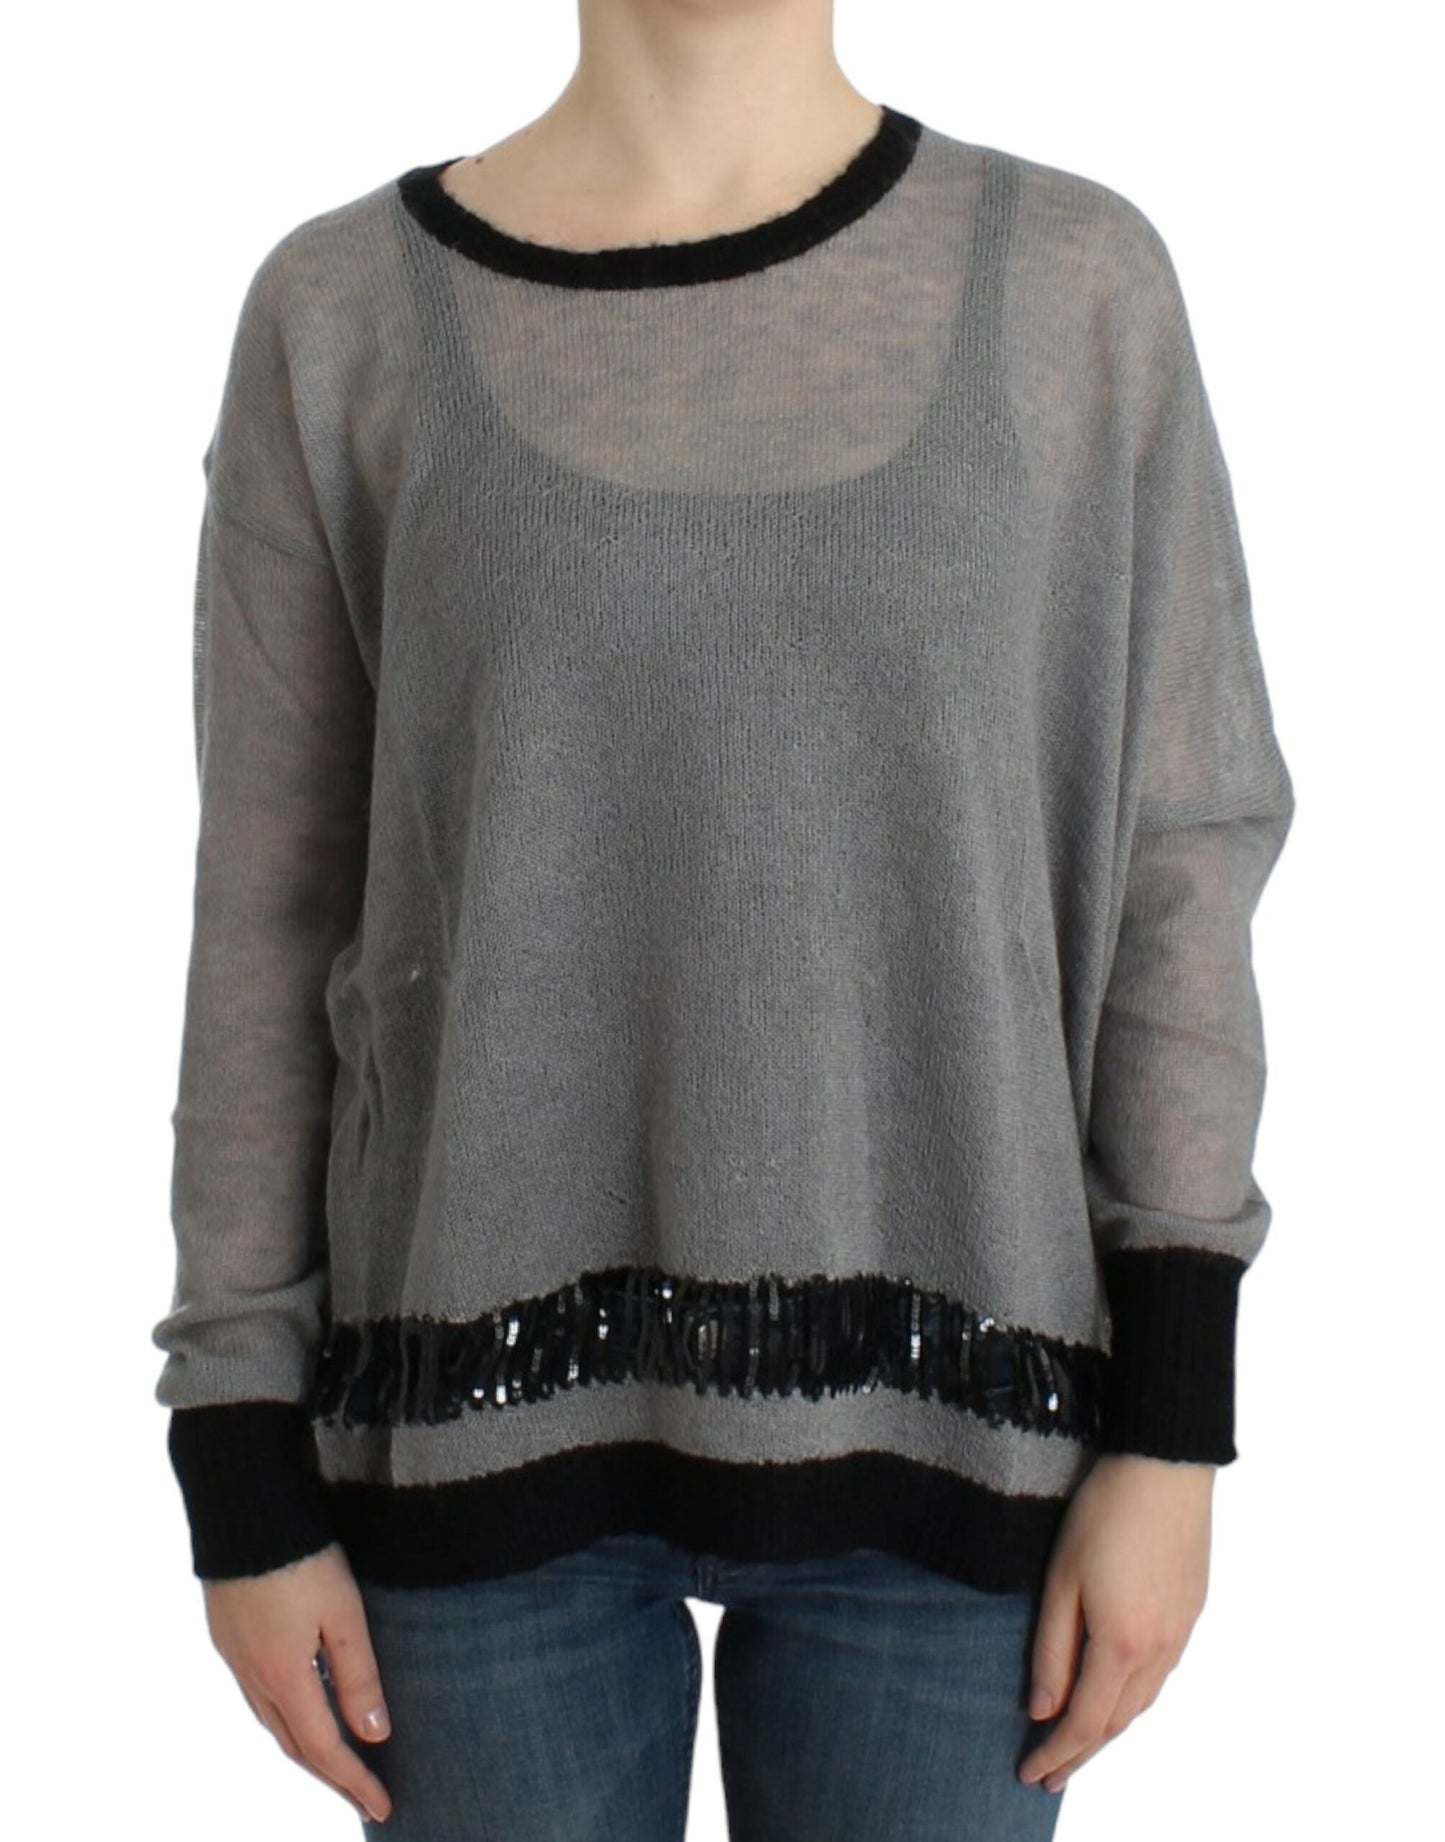 Chic Asymmetric Embellished Knit Sweater